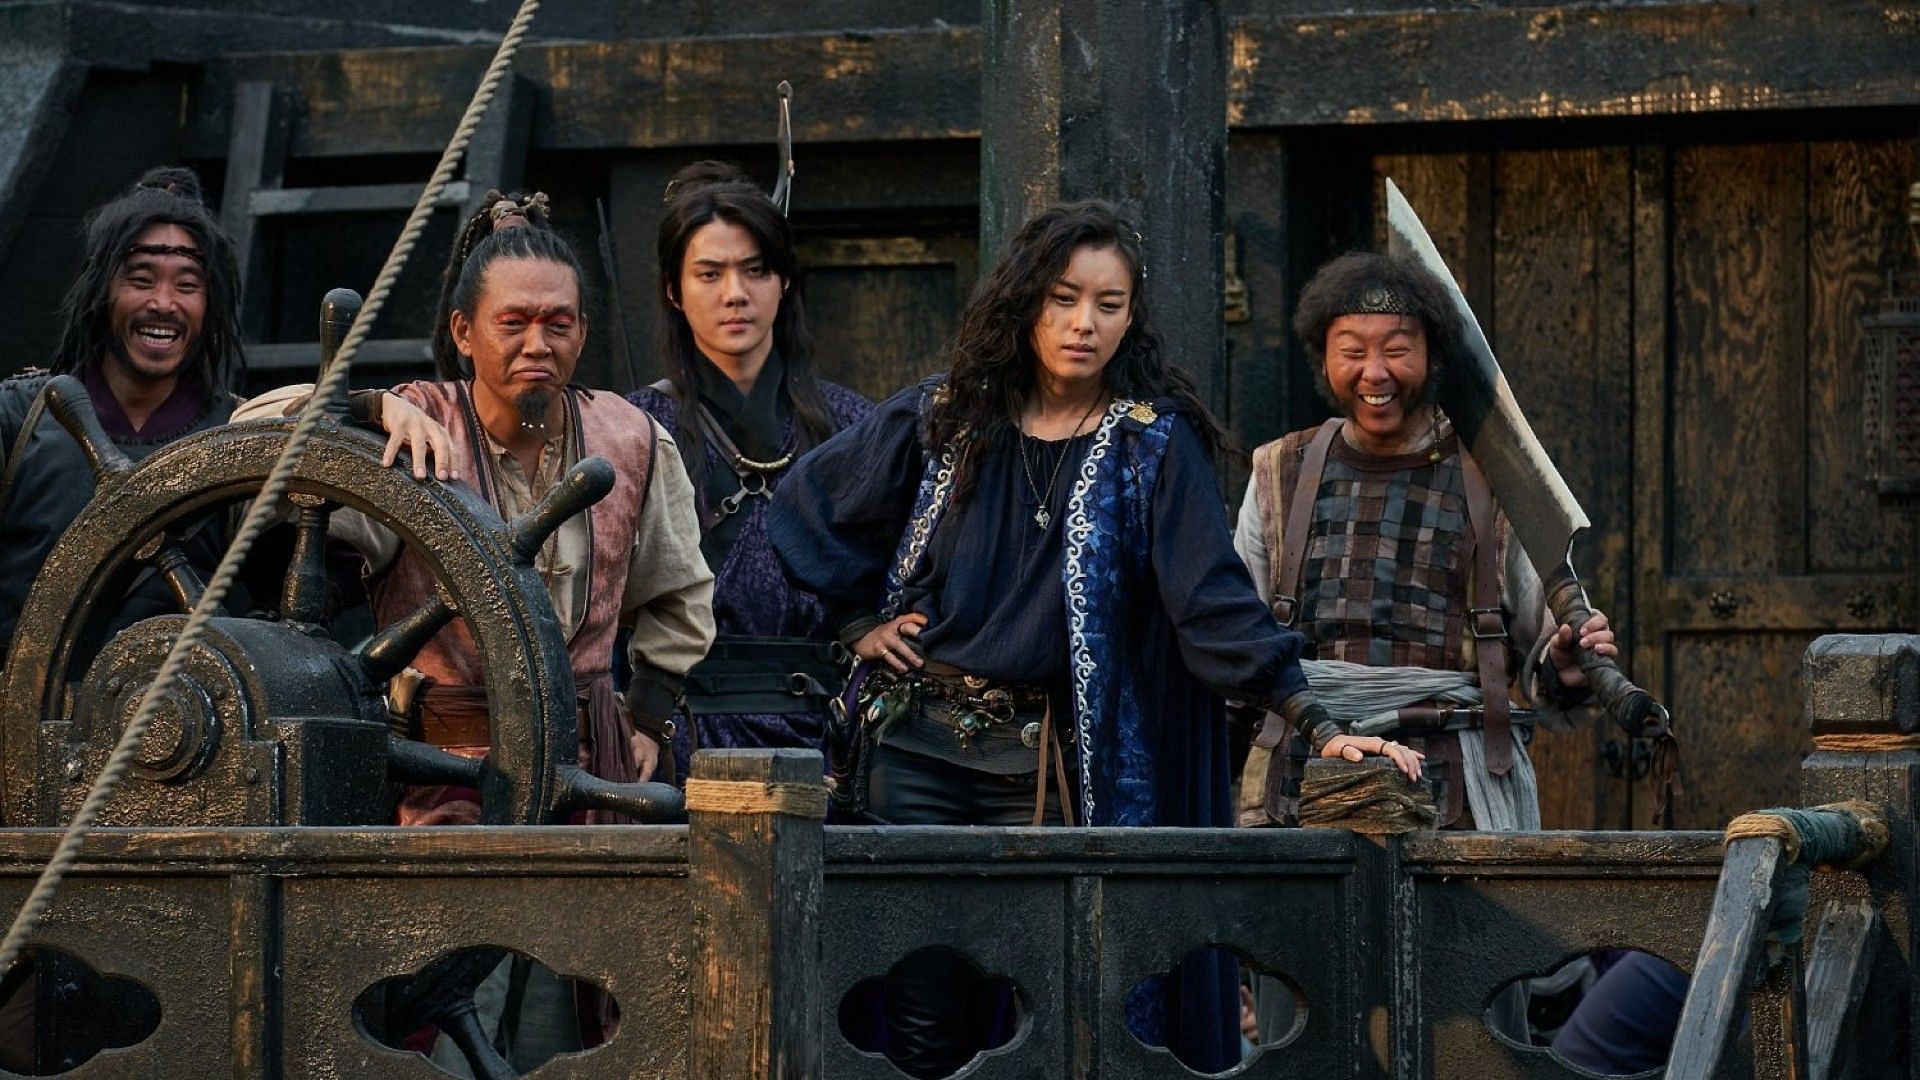 The Pirates 2 starts with a unique female lead only to lose to stereotypes (Image via IMDb)